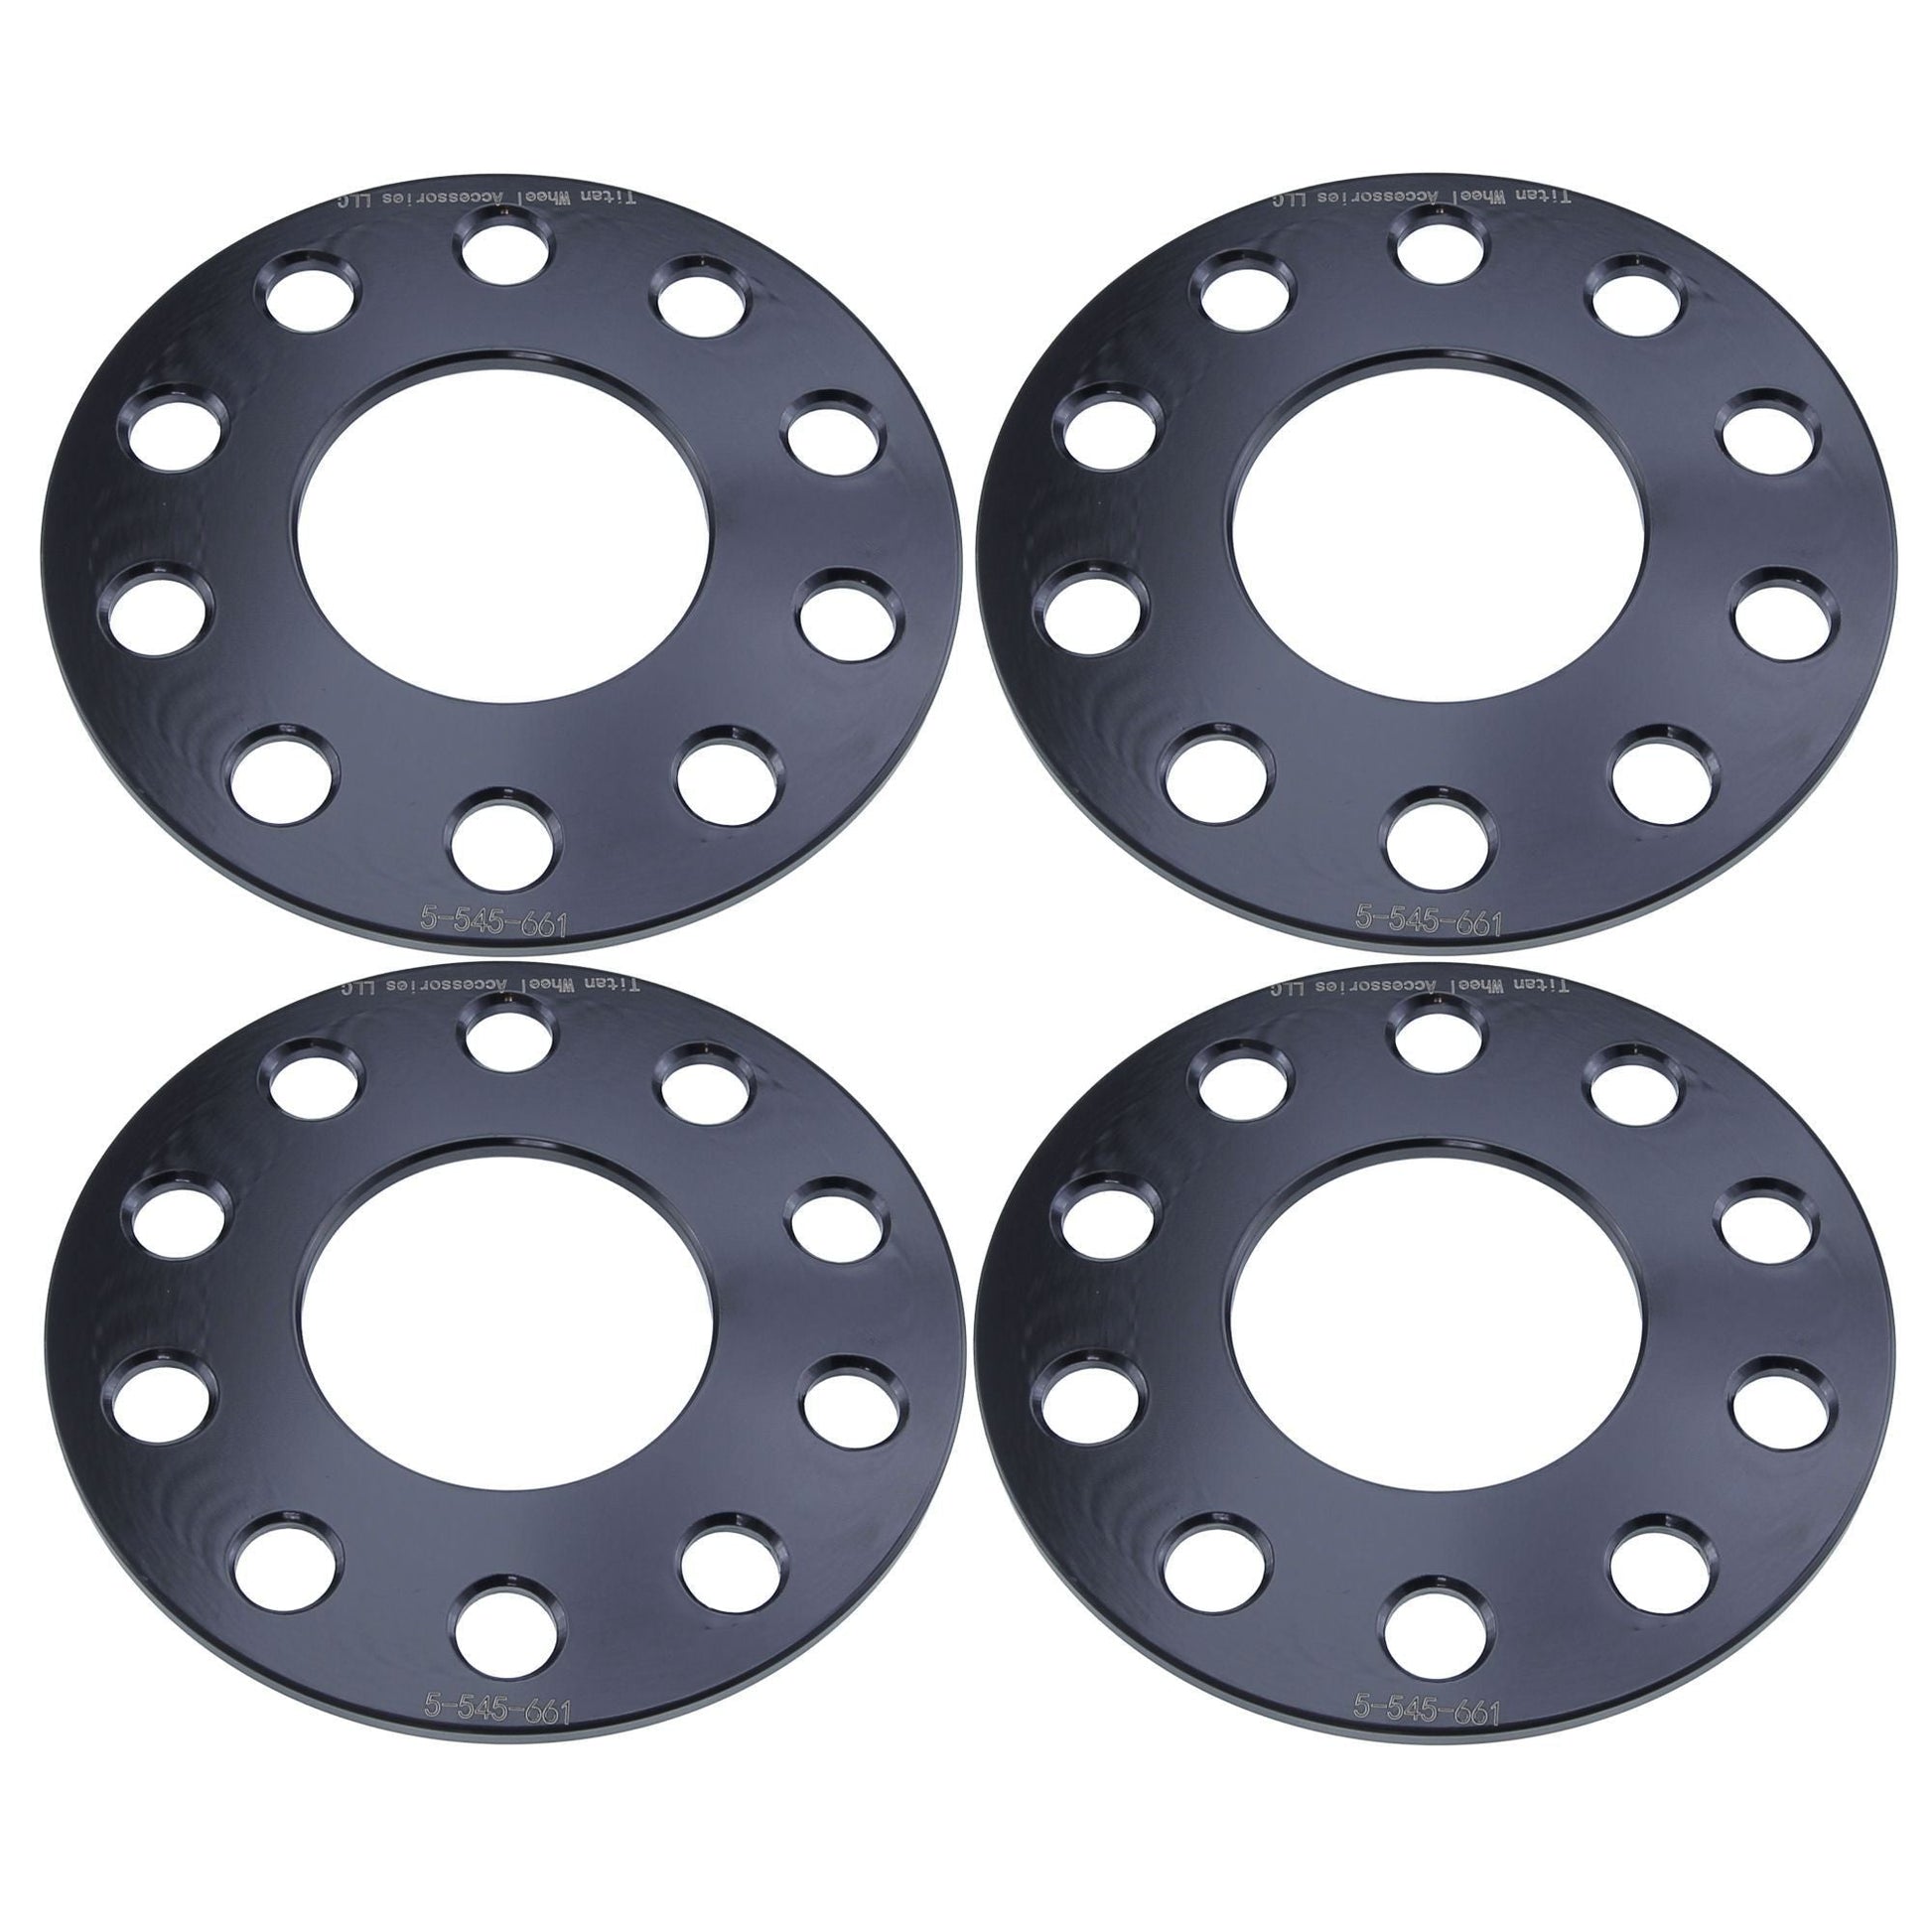 5mm Hubcentric Wheel Spacers for Mazda RX7 RX8 Miata